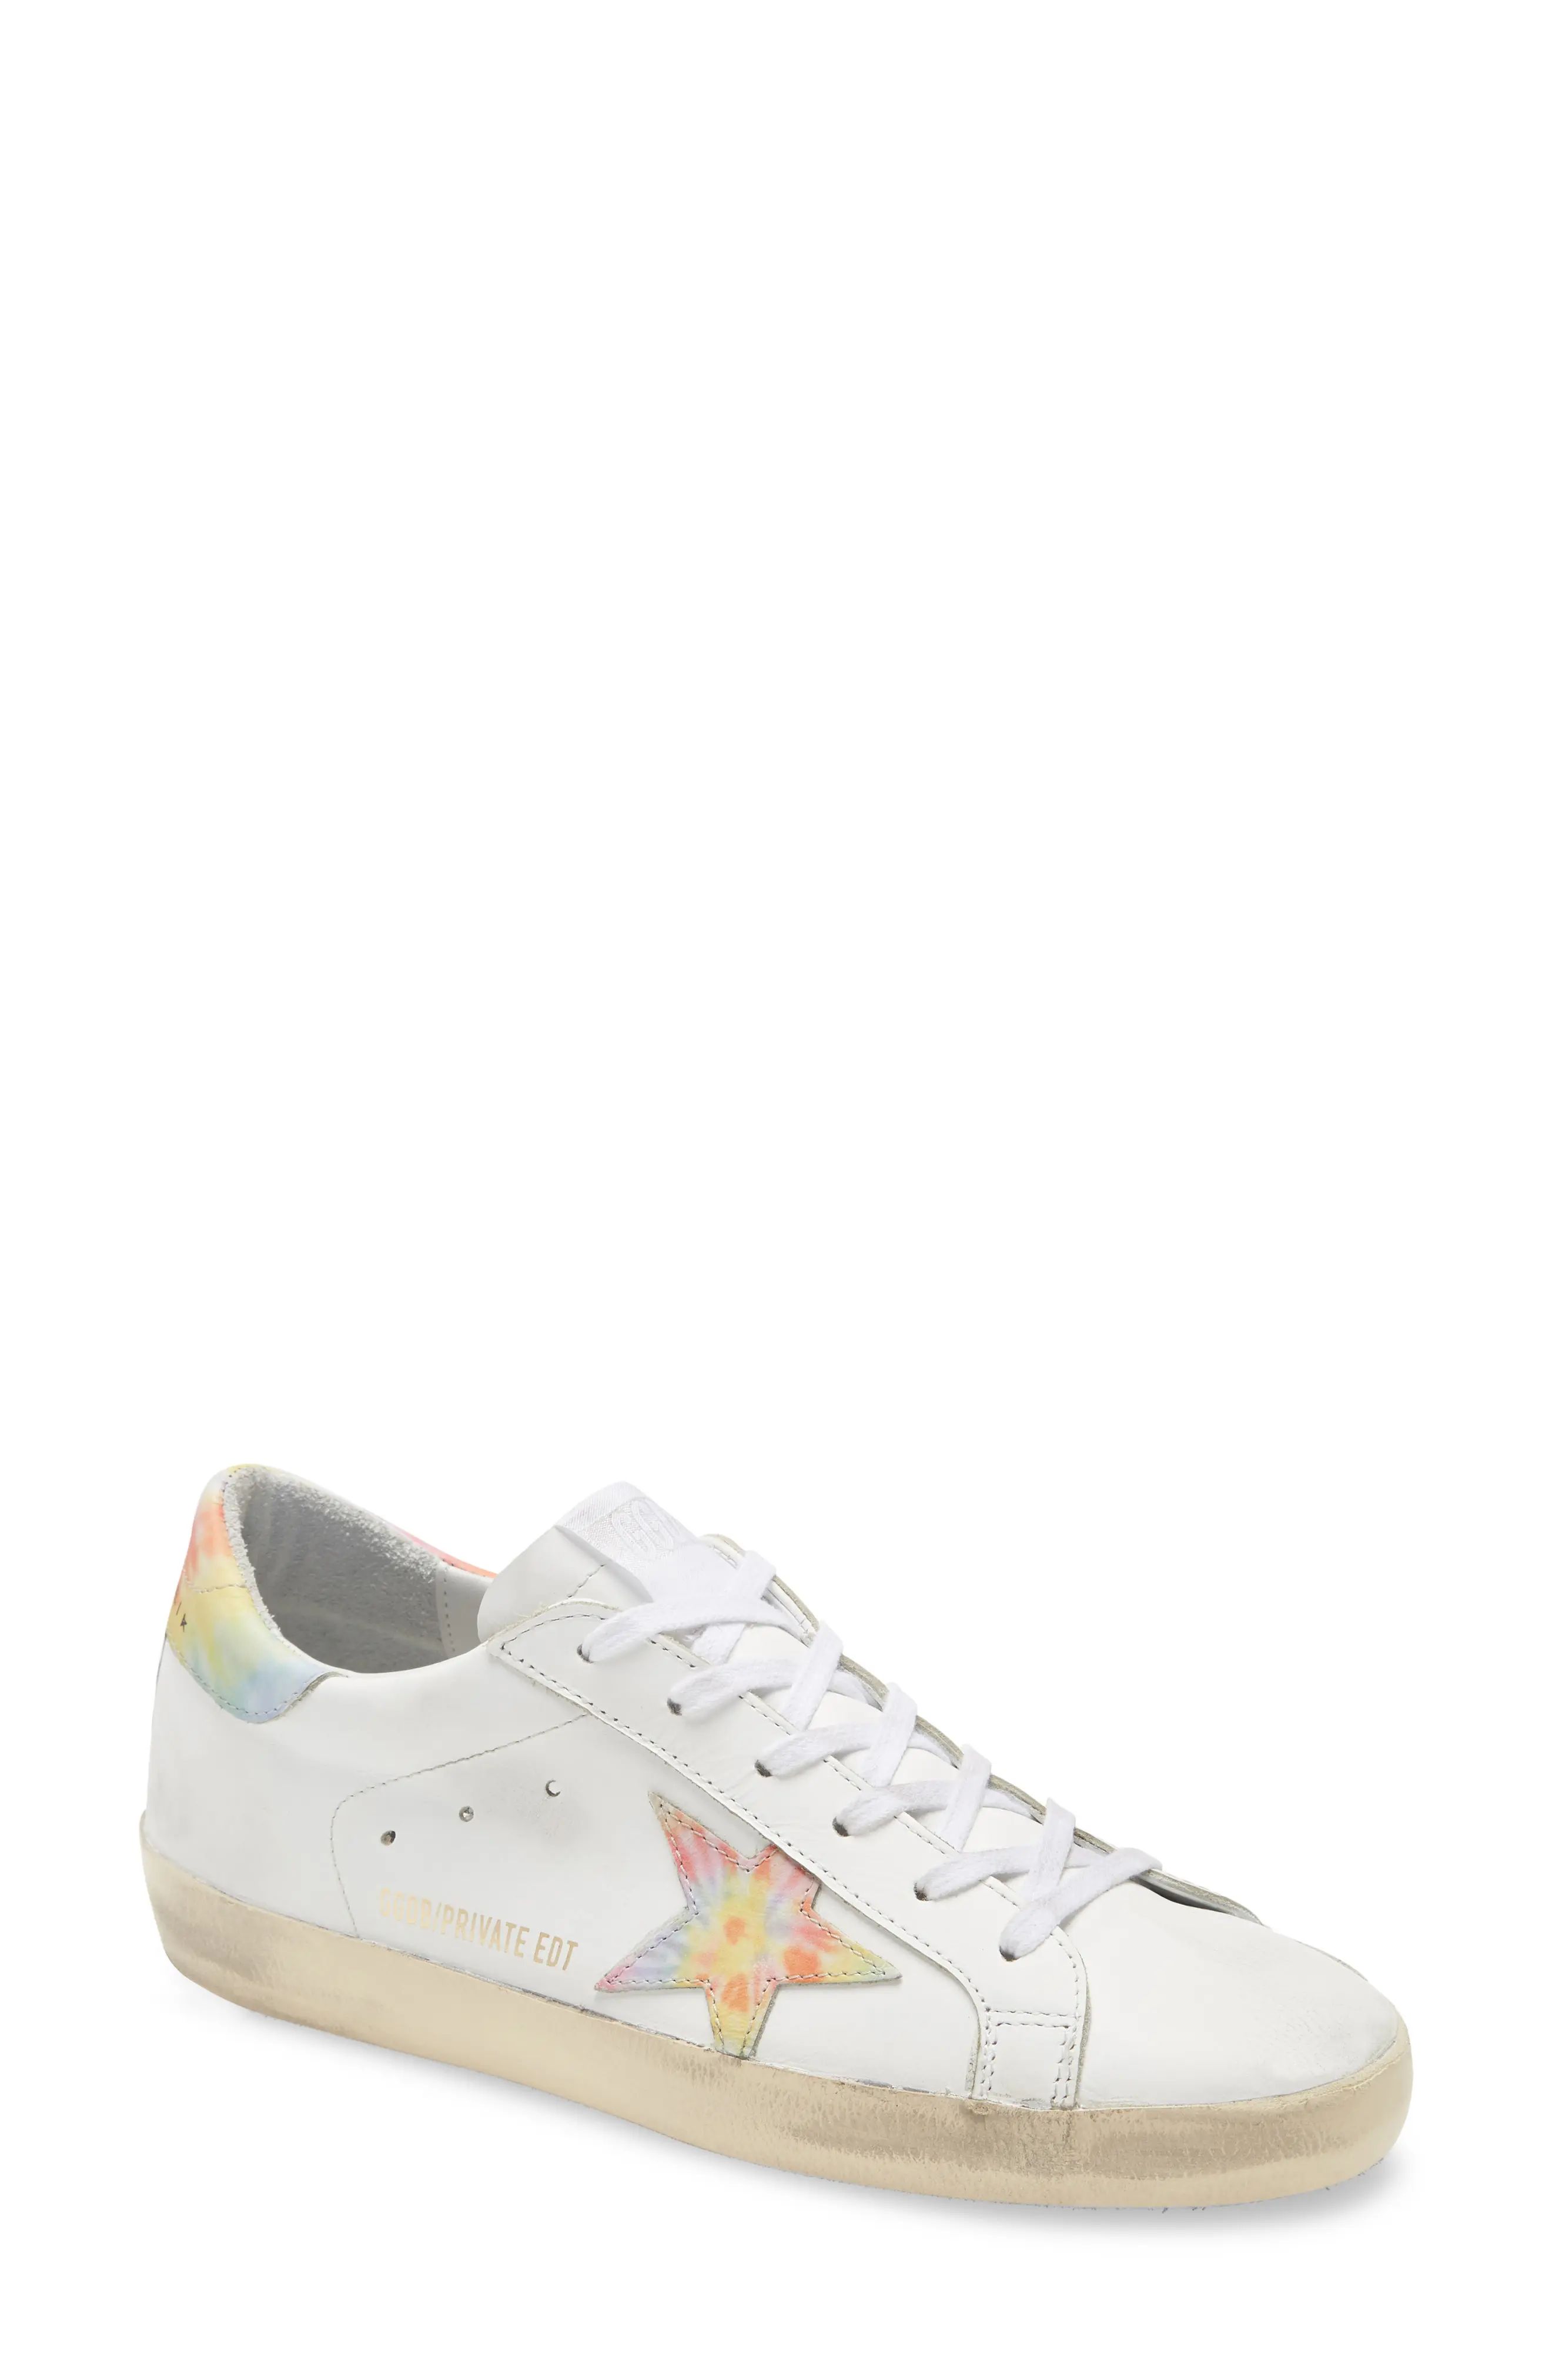 Golden Goose Super-Star Tie Dye Low Top Sneaker in White Leather at Nordstrom, Size 9Us | Nordstrom